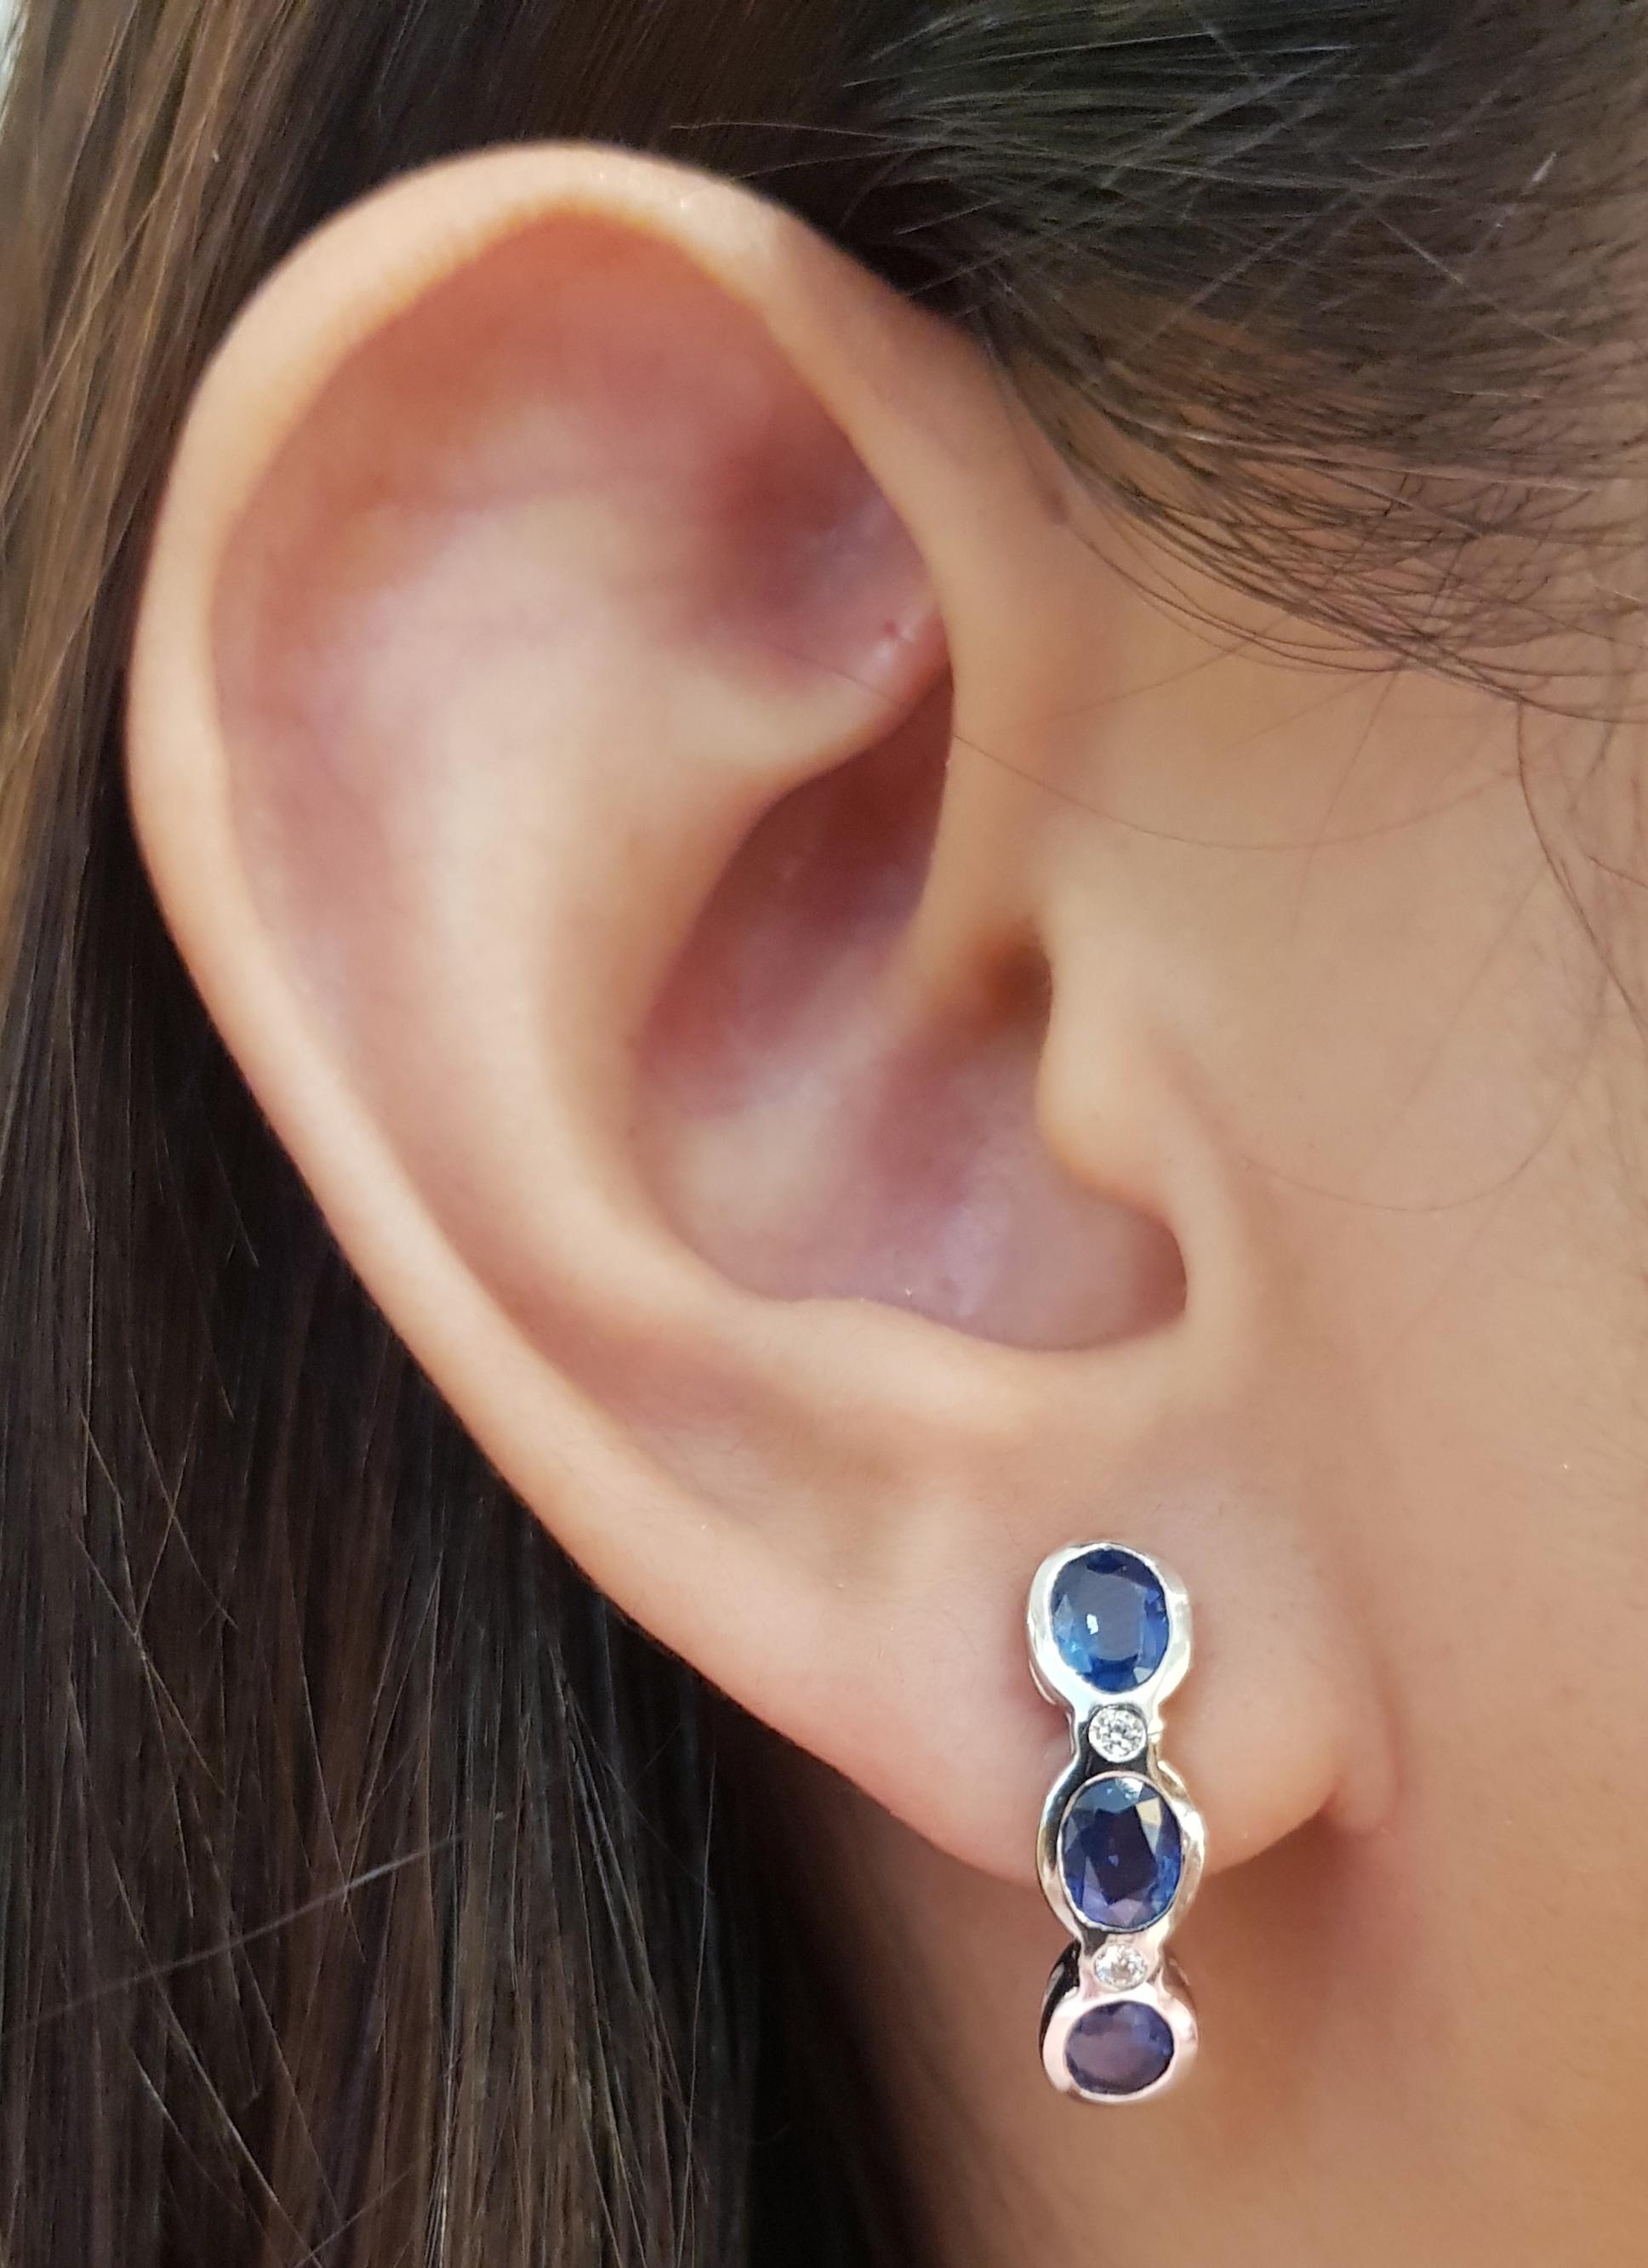 Blue Sapphire 2.75 carats with Diamond  0.08 carat Earrings set in 18 Karat White Gold Settings

Width:   0.5 cm 
Length:  2.0 cm
Total Weight: 6.24 grams

